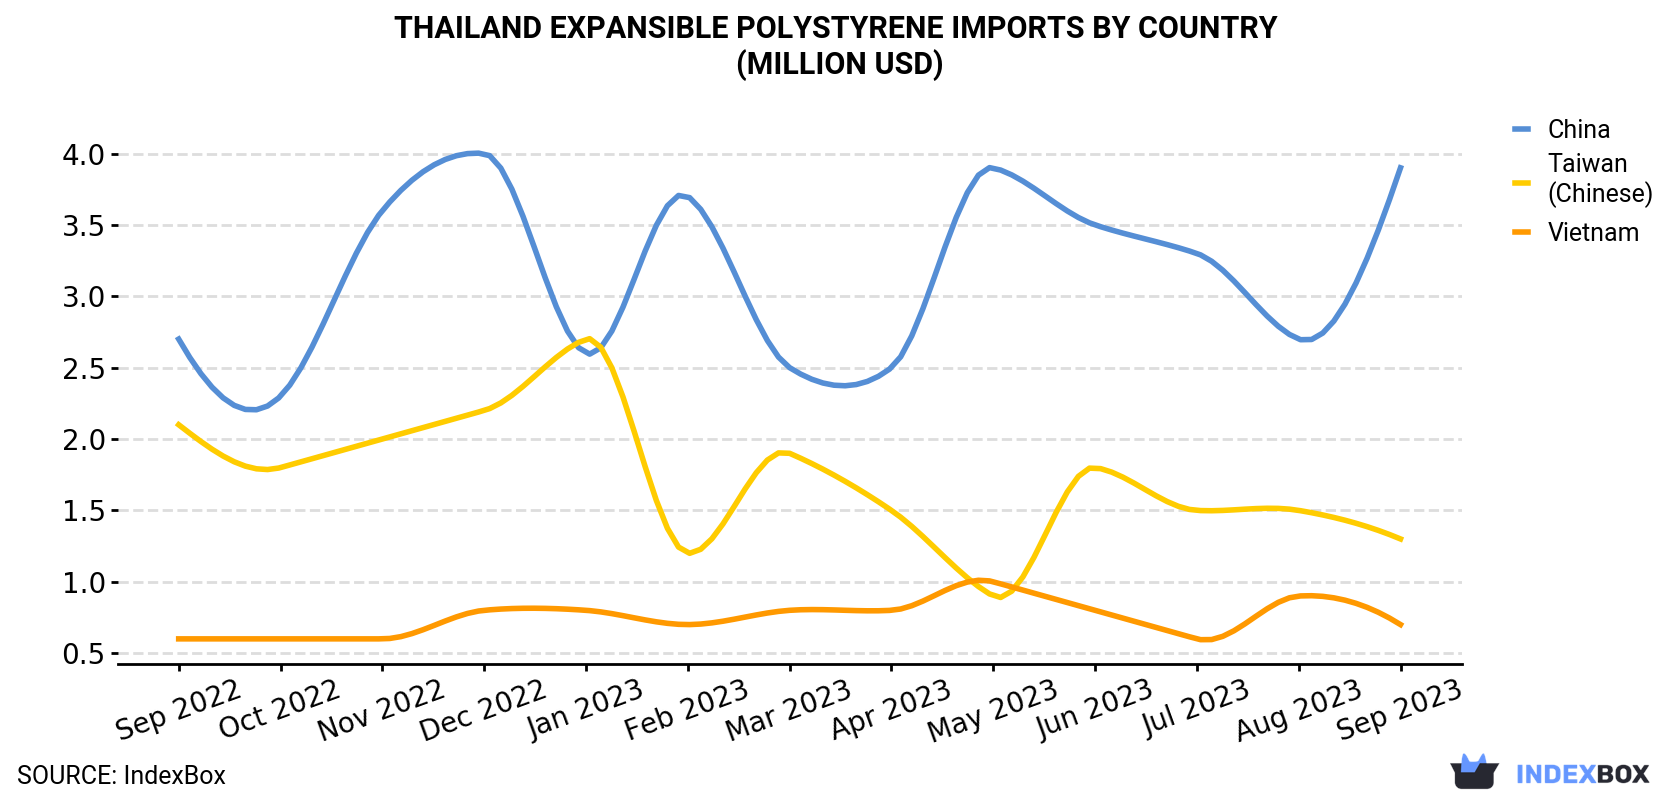 Thailand Expansible Polystyrene Imports By Country (Million USD)